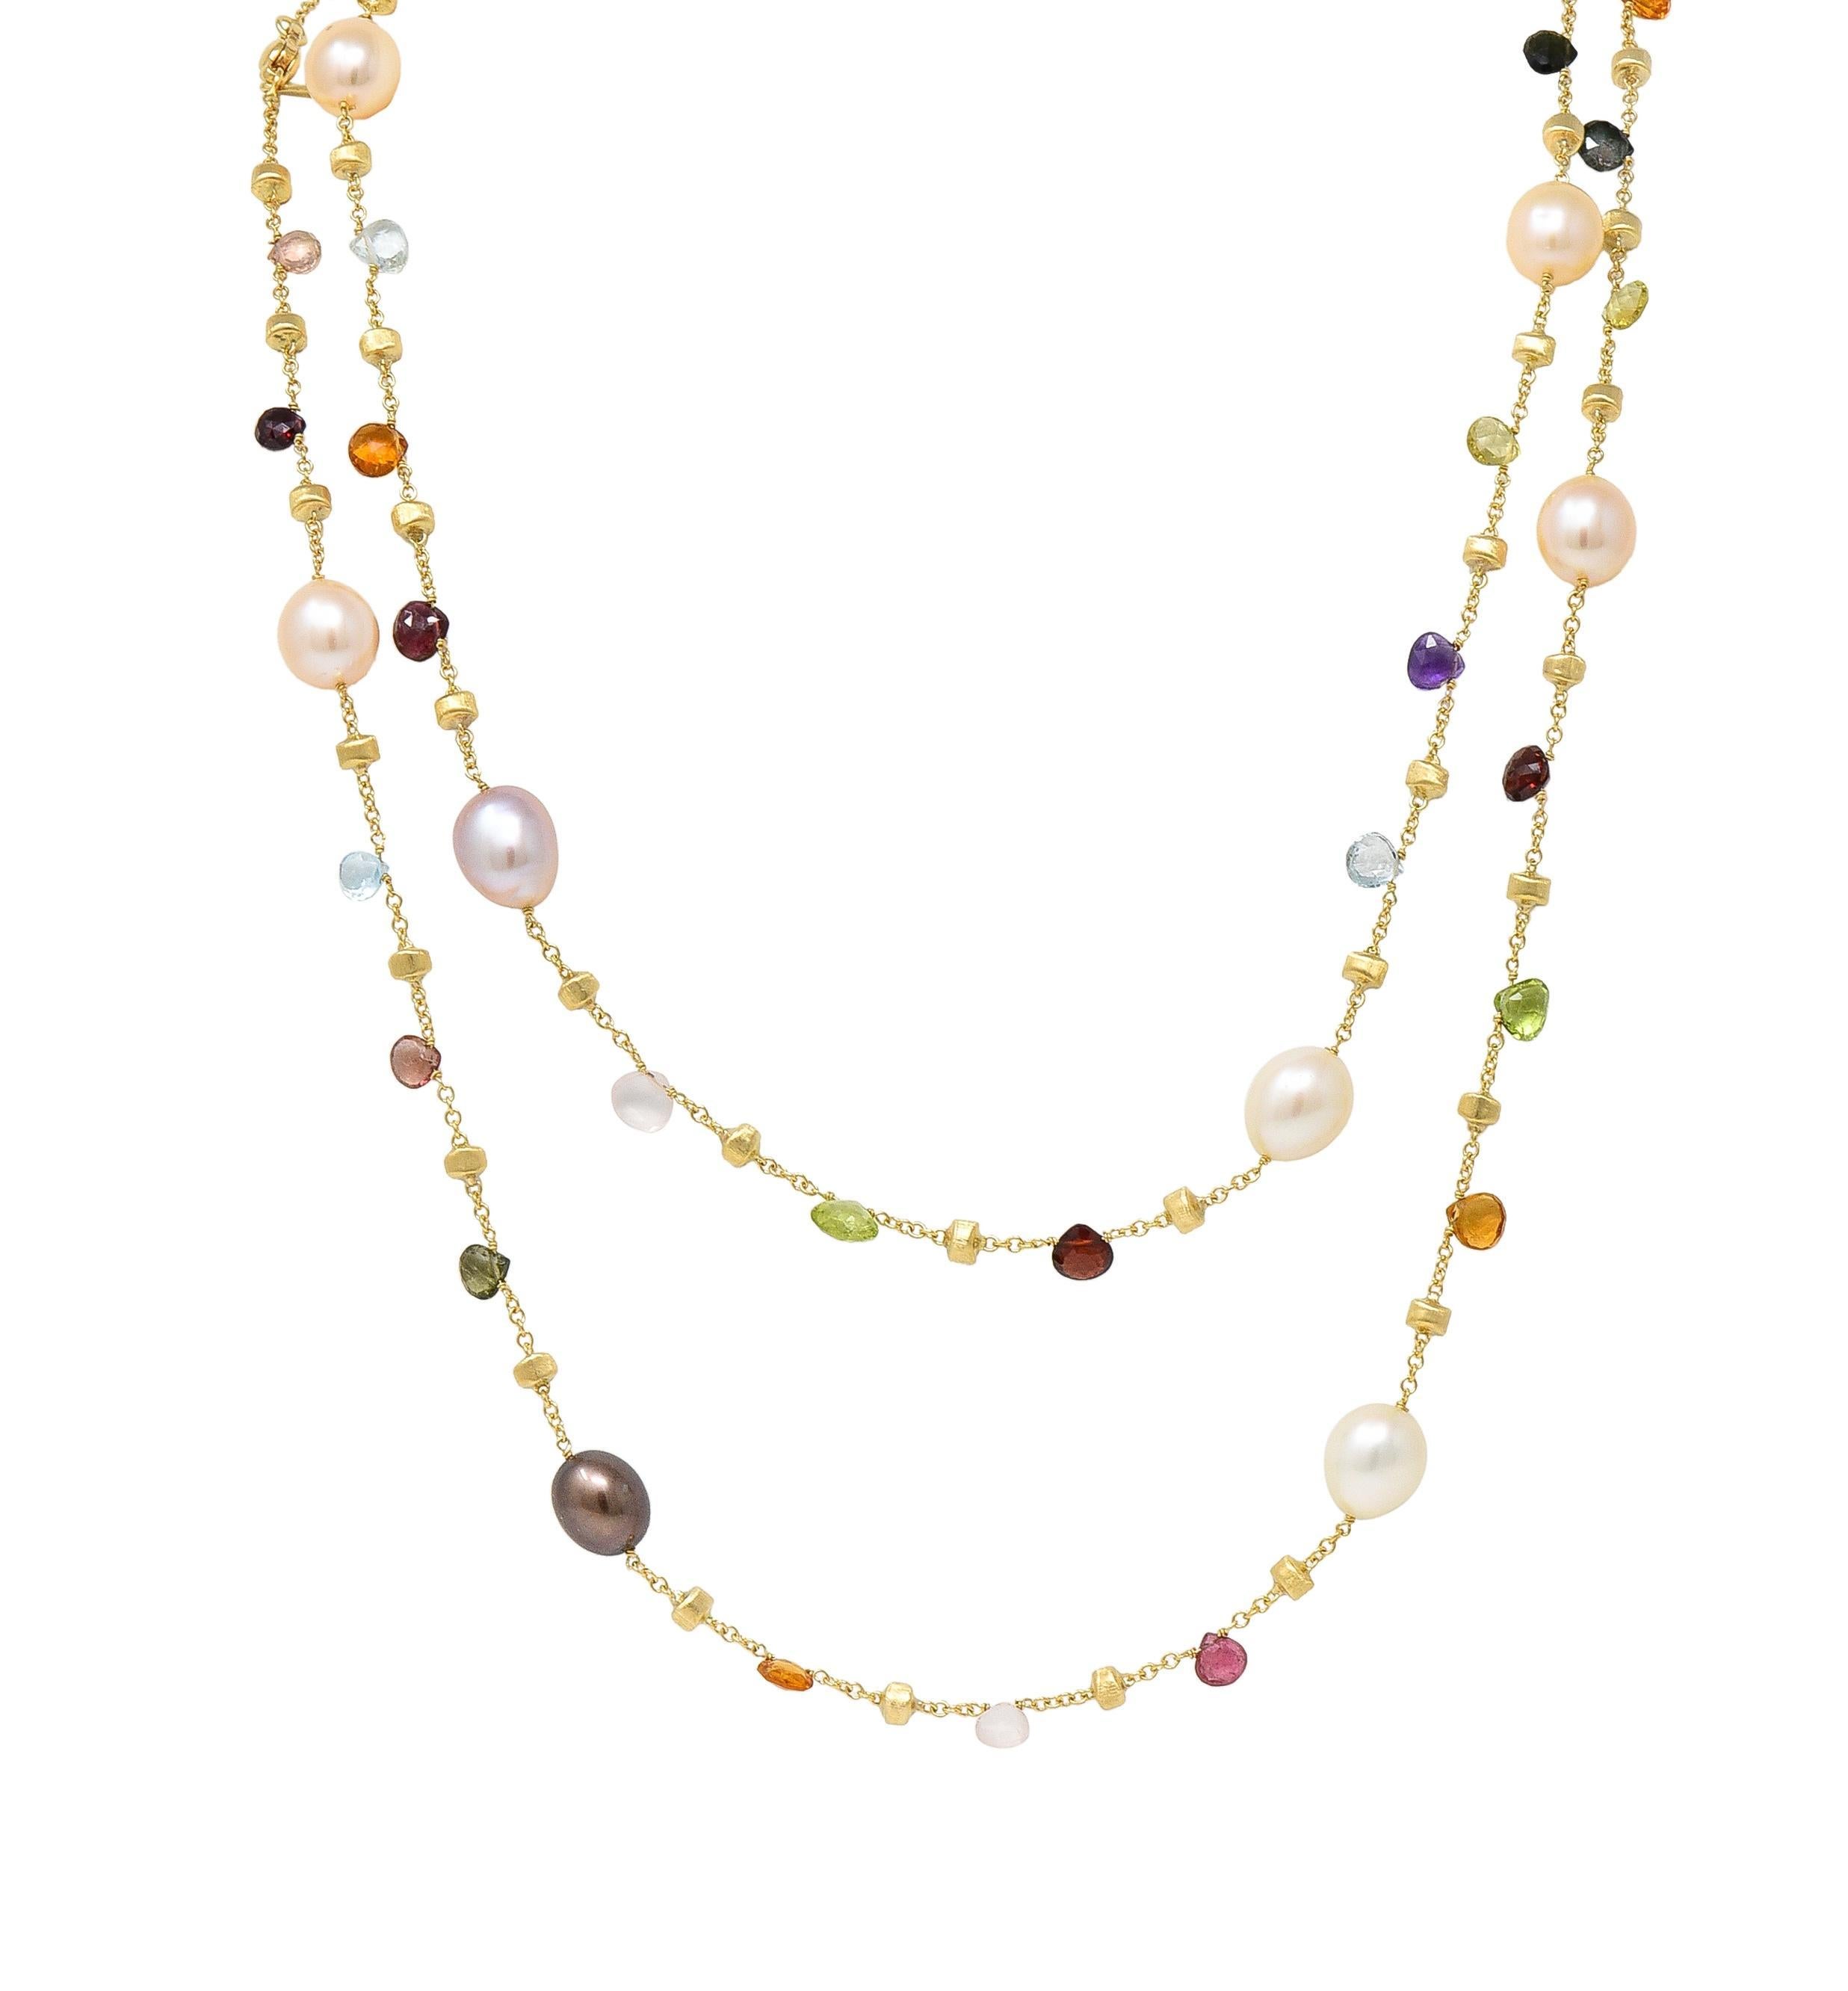 Marco Bicego Cultured Pearl Multi-Gem 18 Karat Yellow Gold Confetti Necklace For Sale 8